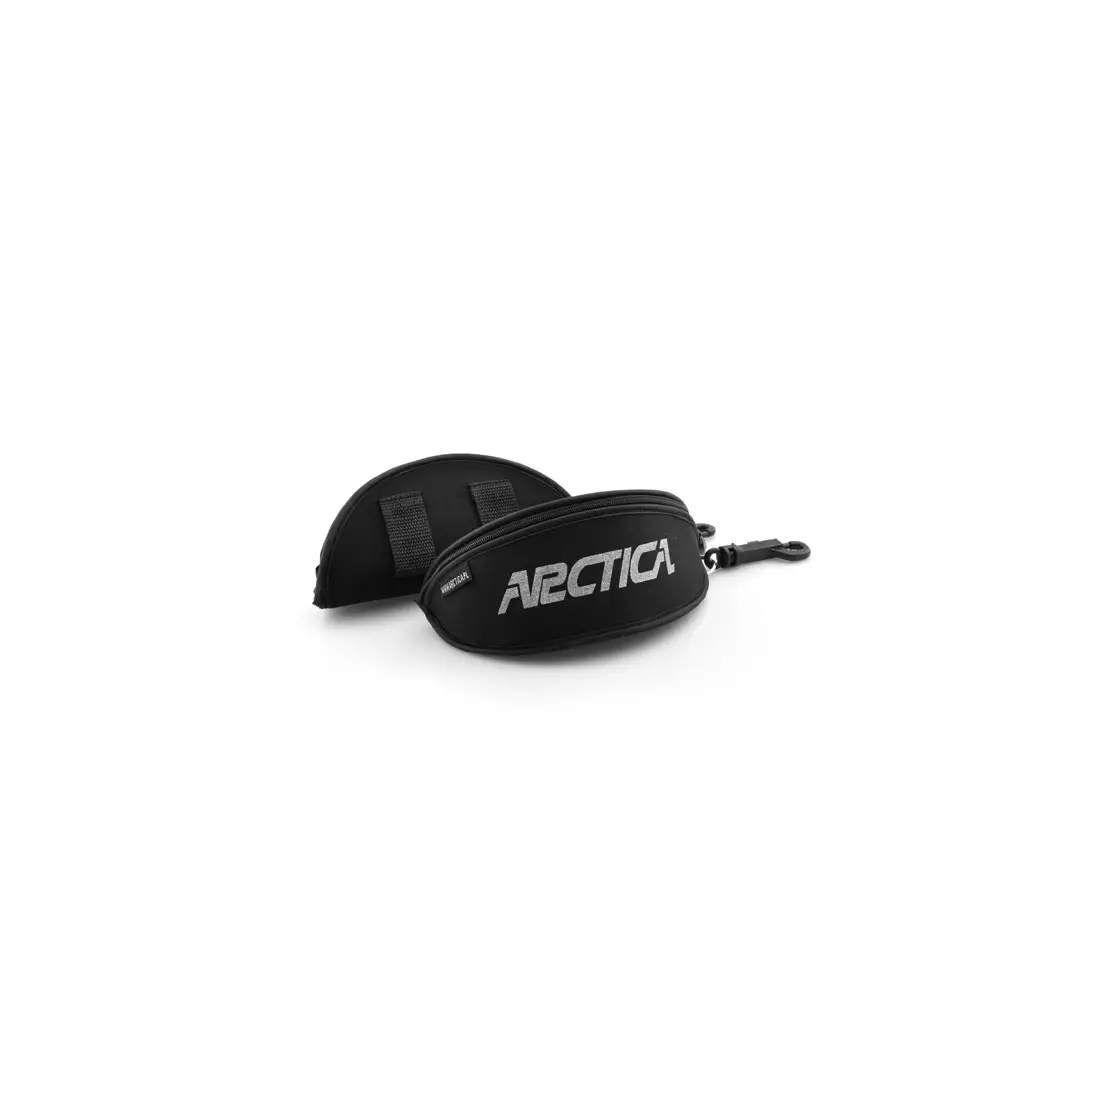 ARCTICA cycling/sports glasses, S 197 FP